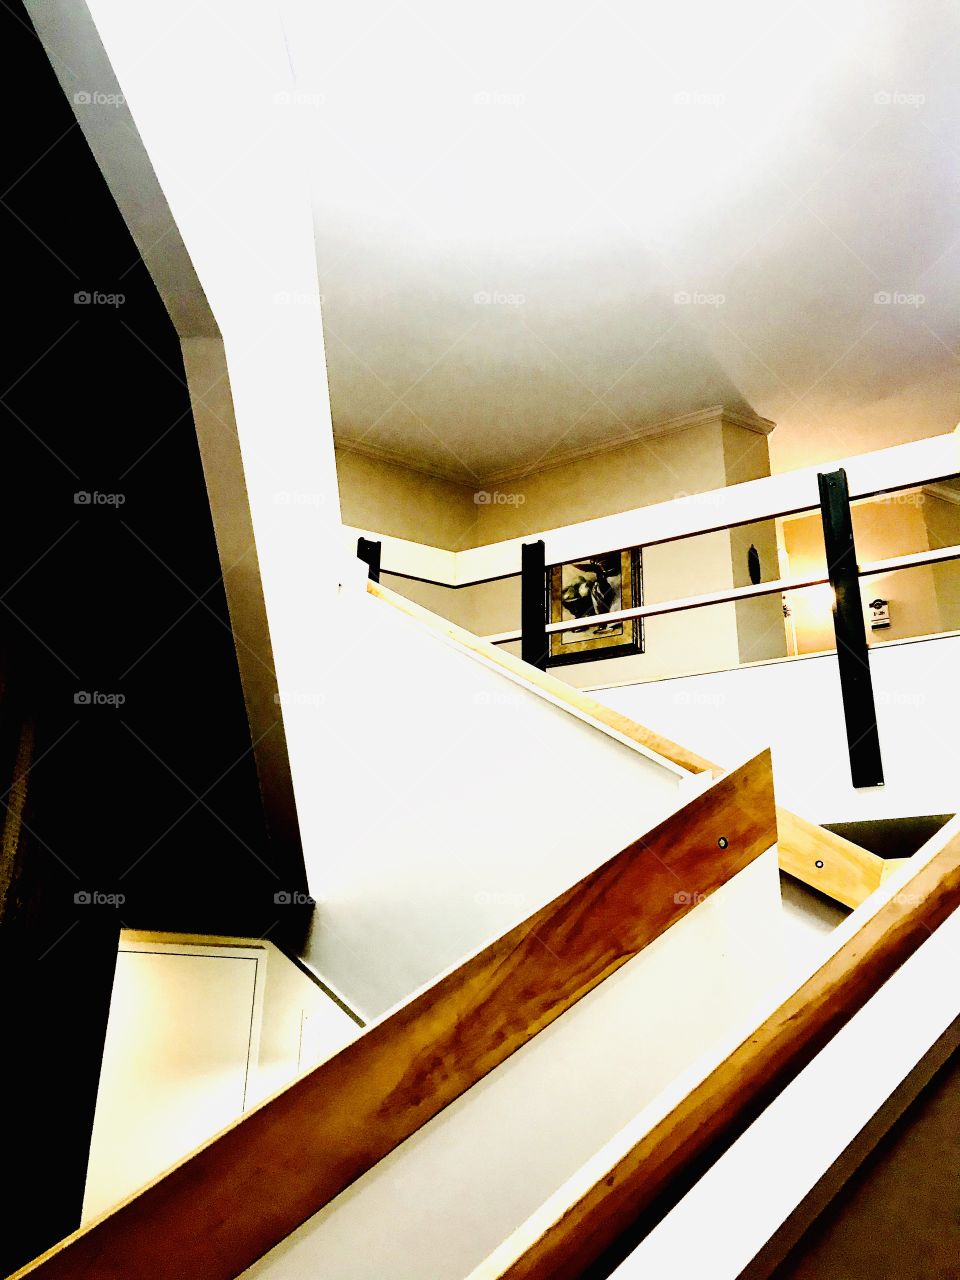 Architectural photo of a white and brown stairway with a turn in it makes for a fun photo! 